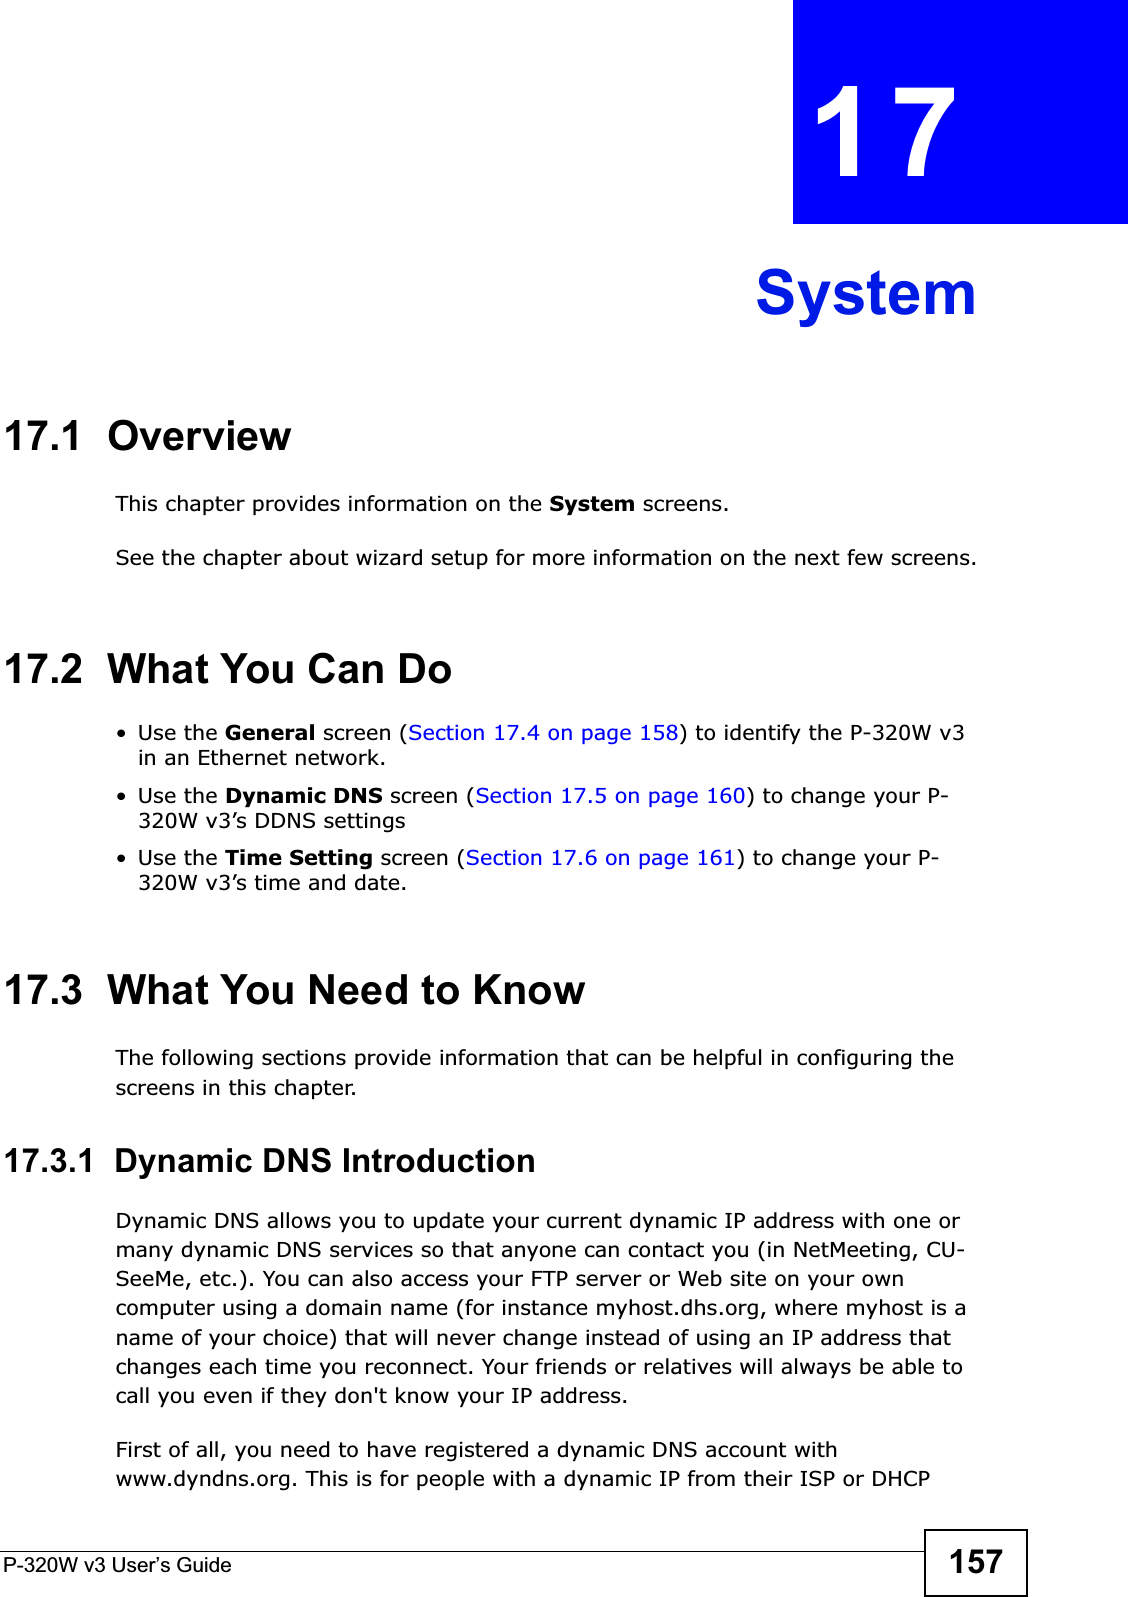 P-320W v3 User’s Guide 157CHAPTER 17System17.1  OverviewThis chapter provides information on the System screens. See the chapter about wizard setup for more information on the next few screens.17.2  What You Can Do•Use the General screen (Section 17.4 on page 158) to identify the P-320W v3 in an Ethernet network.•Use the Dynamic DNS screen (Section 17.5 on page 160) to change your P-320W v3’s DDNS settings•Use the Time Setting screen (Section 17.6 on page 161) to change your P-320W v3’s time and date.17.3  What You Need to KnowThe following sections provide information that can be helpful in configuring the screens in this chapter.17.3.1  Dynamic DNS Introduction Dynamic DNS allows you to update your current dynamic IP address with one or many dynamic DNS services so that anyone can contact you (in NetMeeting, CU-SeeMe, etc.). You can also access your FTP server or Web site on your own computer using a domain name (for instance myhost.dhs.org, where myhost is a name of your choice) that will never change instead of using an IP address that changes each time you reconnect. Your friends or relatives will always be able to call you even if they don&apos;t know your IP address.First of all, you need to have registered a dynamic DNS account with www.dyndns.org. This is for people with a dynamic IP from their ISP or DHCP 